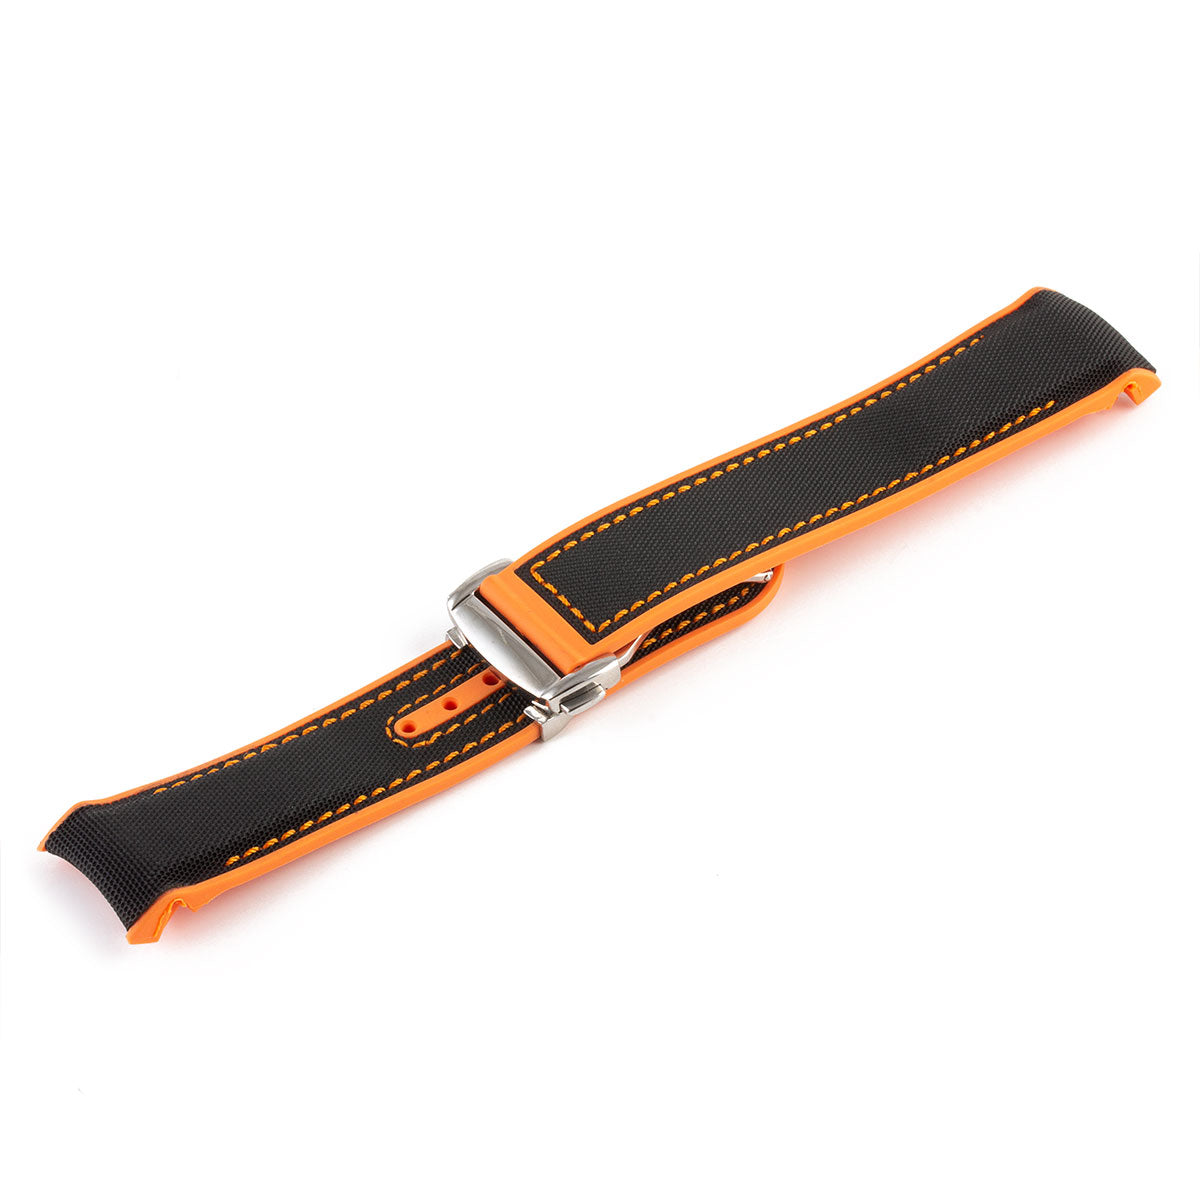 Omega Speedmaster / Seamaster - Integrated rubber watch band - Stitched with cordura effect (black, blue, red, orange)